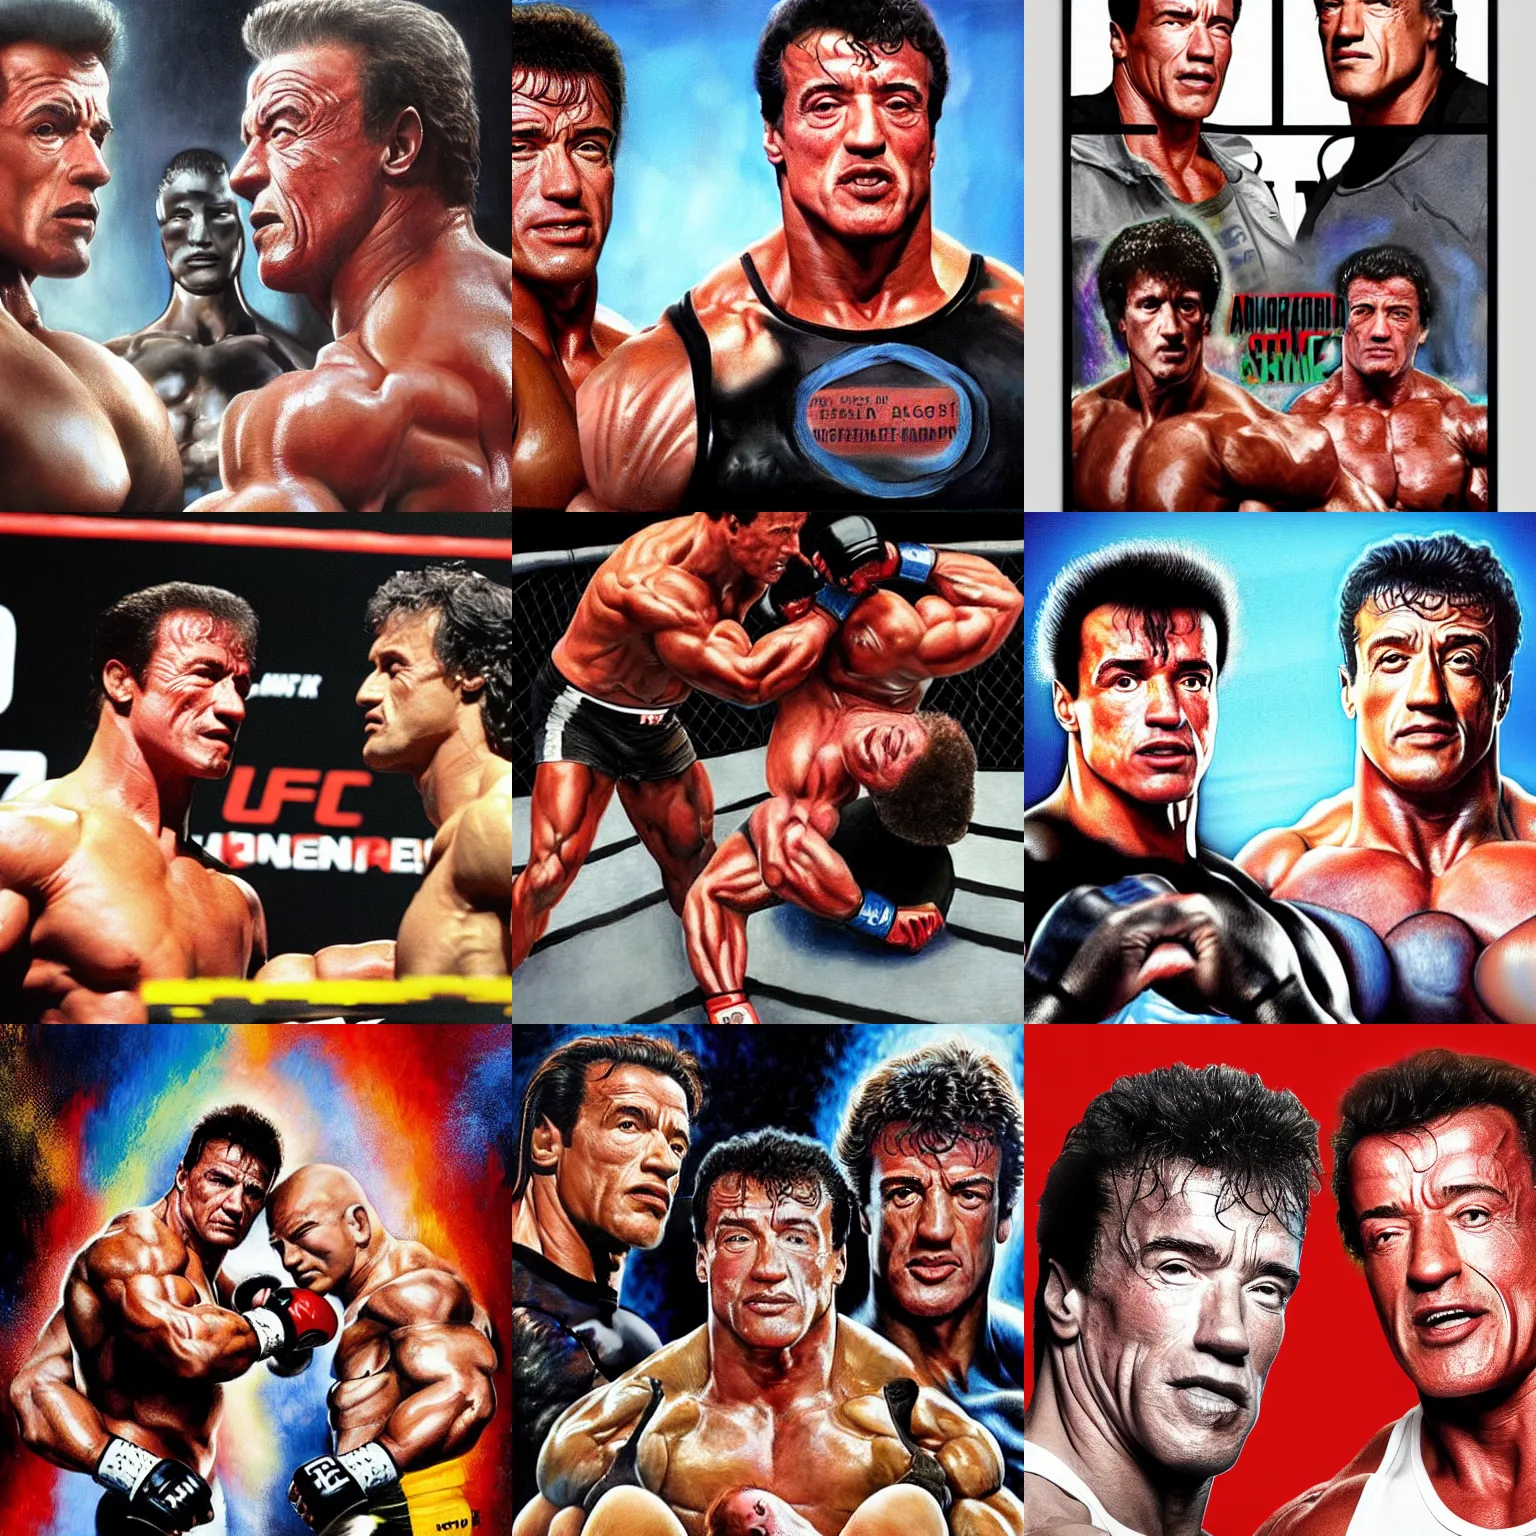 Prompt: Arnold Schwarzenegger vs Sylvester Stallone in an UFC fight in octagon, artstation hall of fame gallery, editors choice, #1 digital painting of all time, most beautiful image ever created, emotionally evocative, greatest art ever made, lifetime achievement magnum opus masterpiece, the most amazing breathtaking image with the deepest message ever painted, a thing of beauty beyond imagination or words, 4k, highly detailed, cinematic lighting